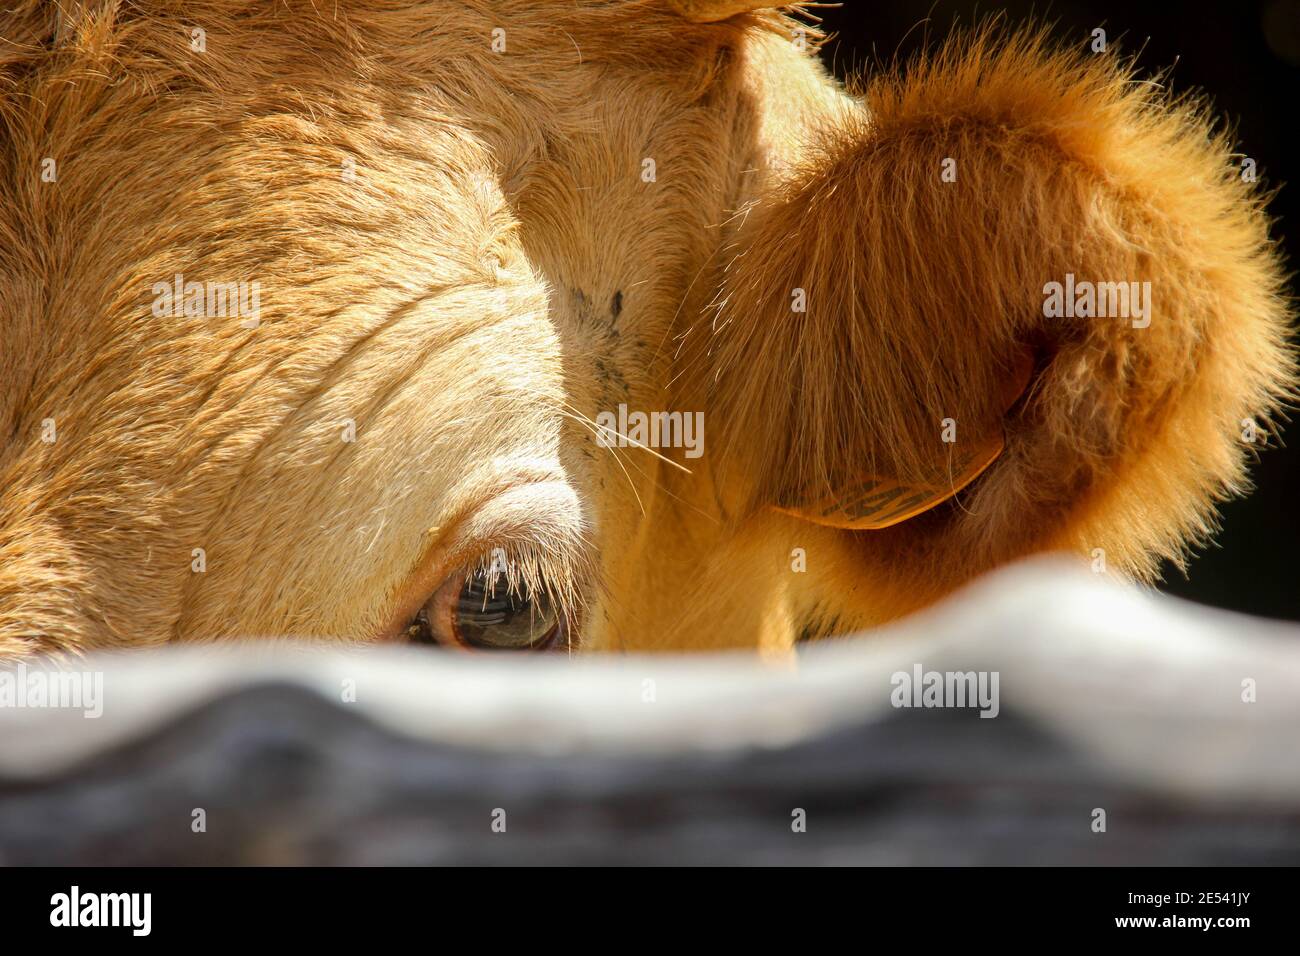 Cow, close up, cute, looking, Azores. Stock Photo